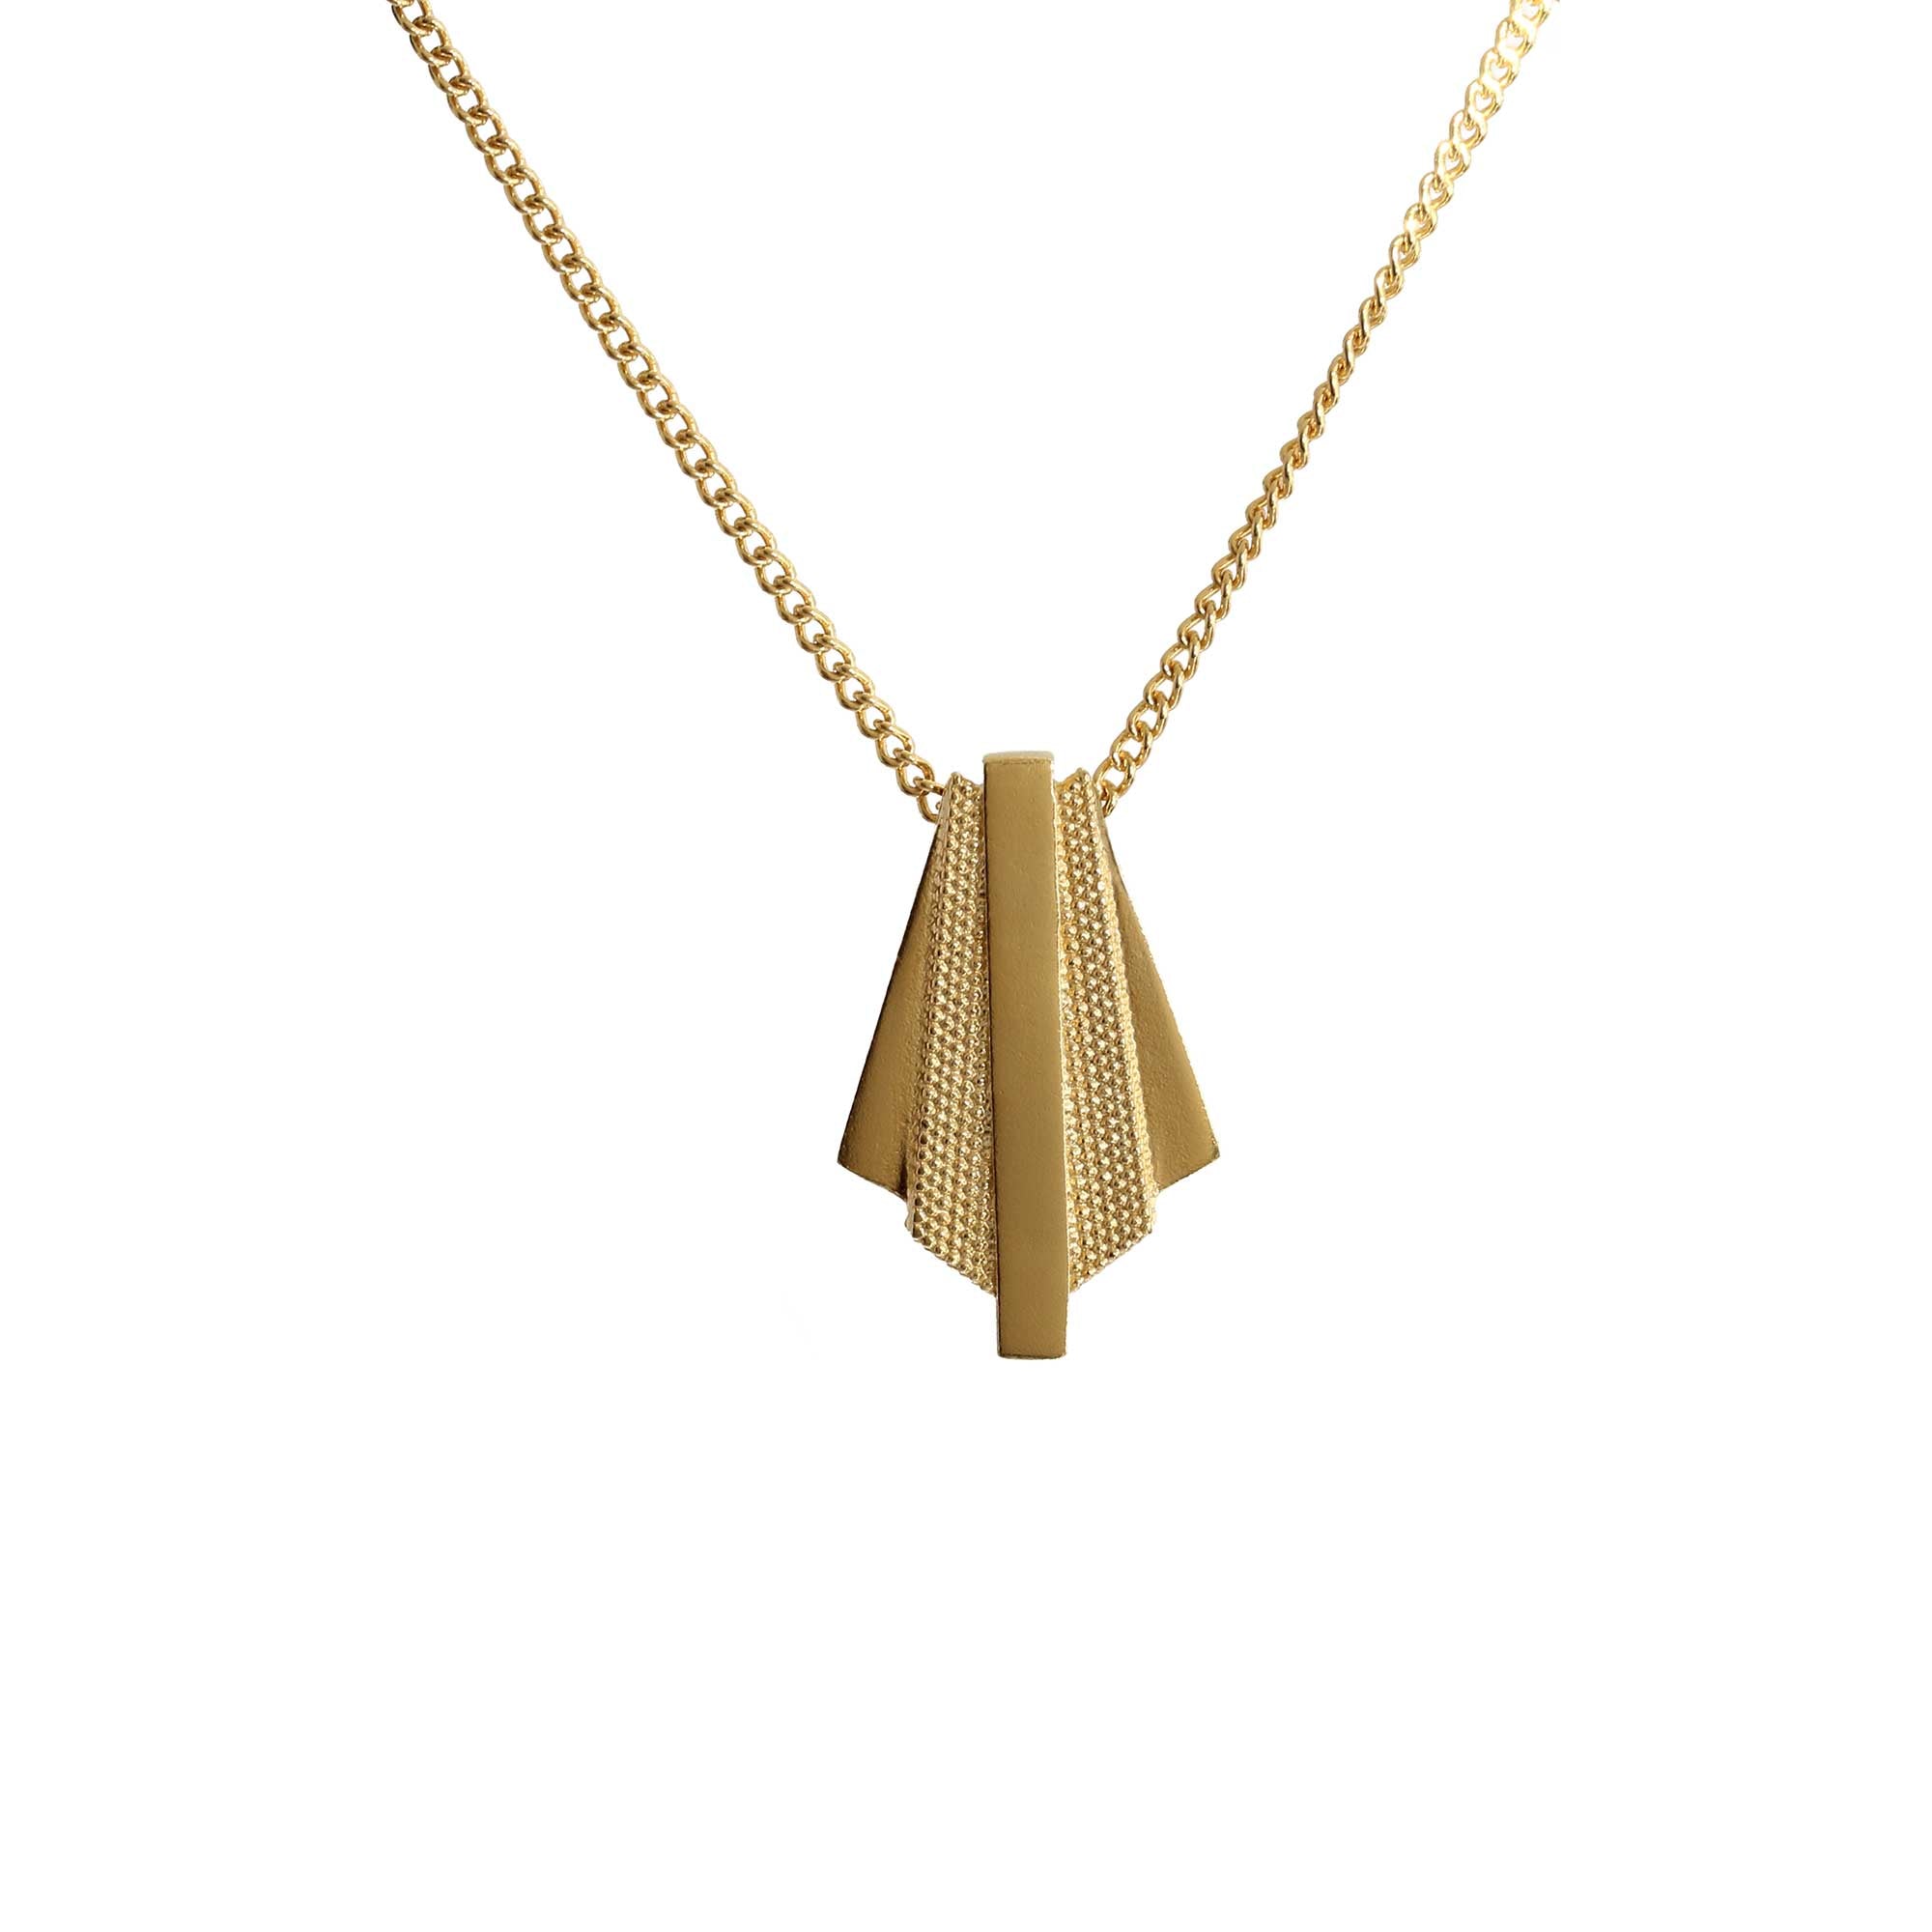 Contrasting textures on the Ruptus Slab Geometric Necklace in Yellow Gold